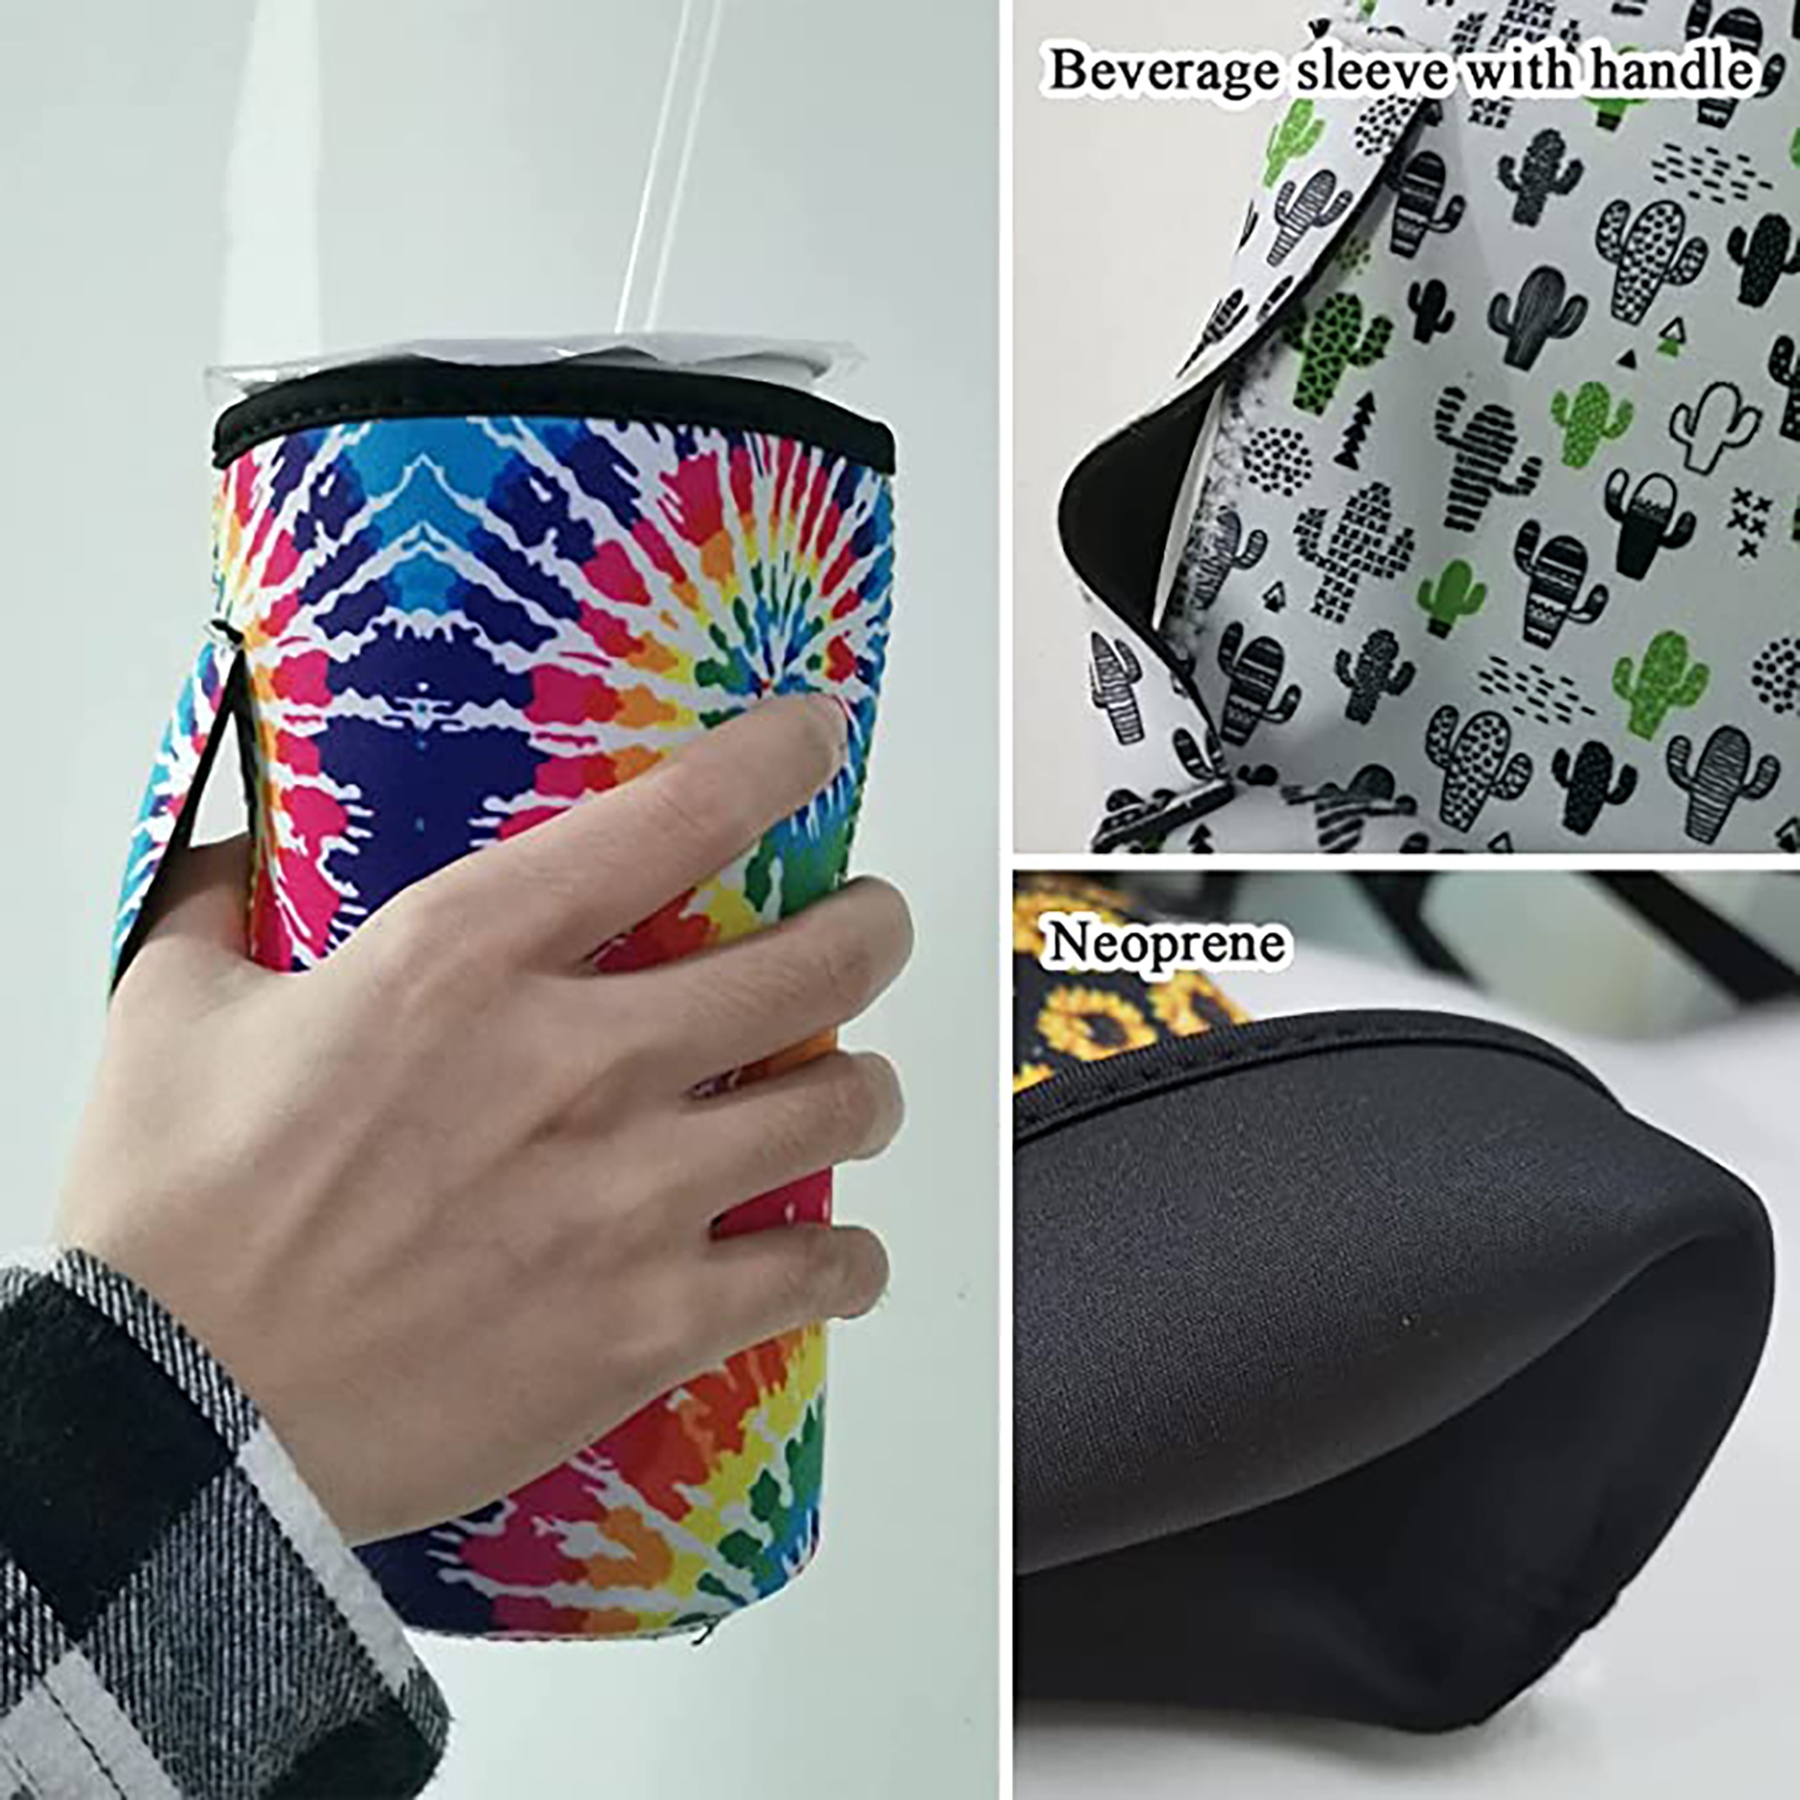 30-32 oz Reusable Neoprene Insulated Sleeves Cup Cover